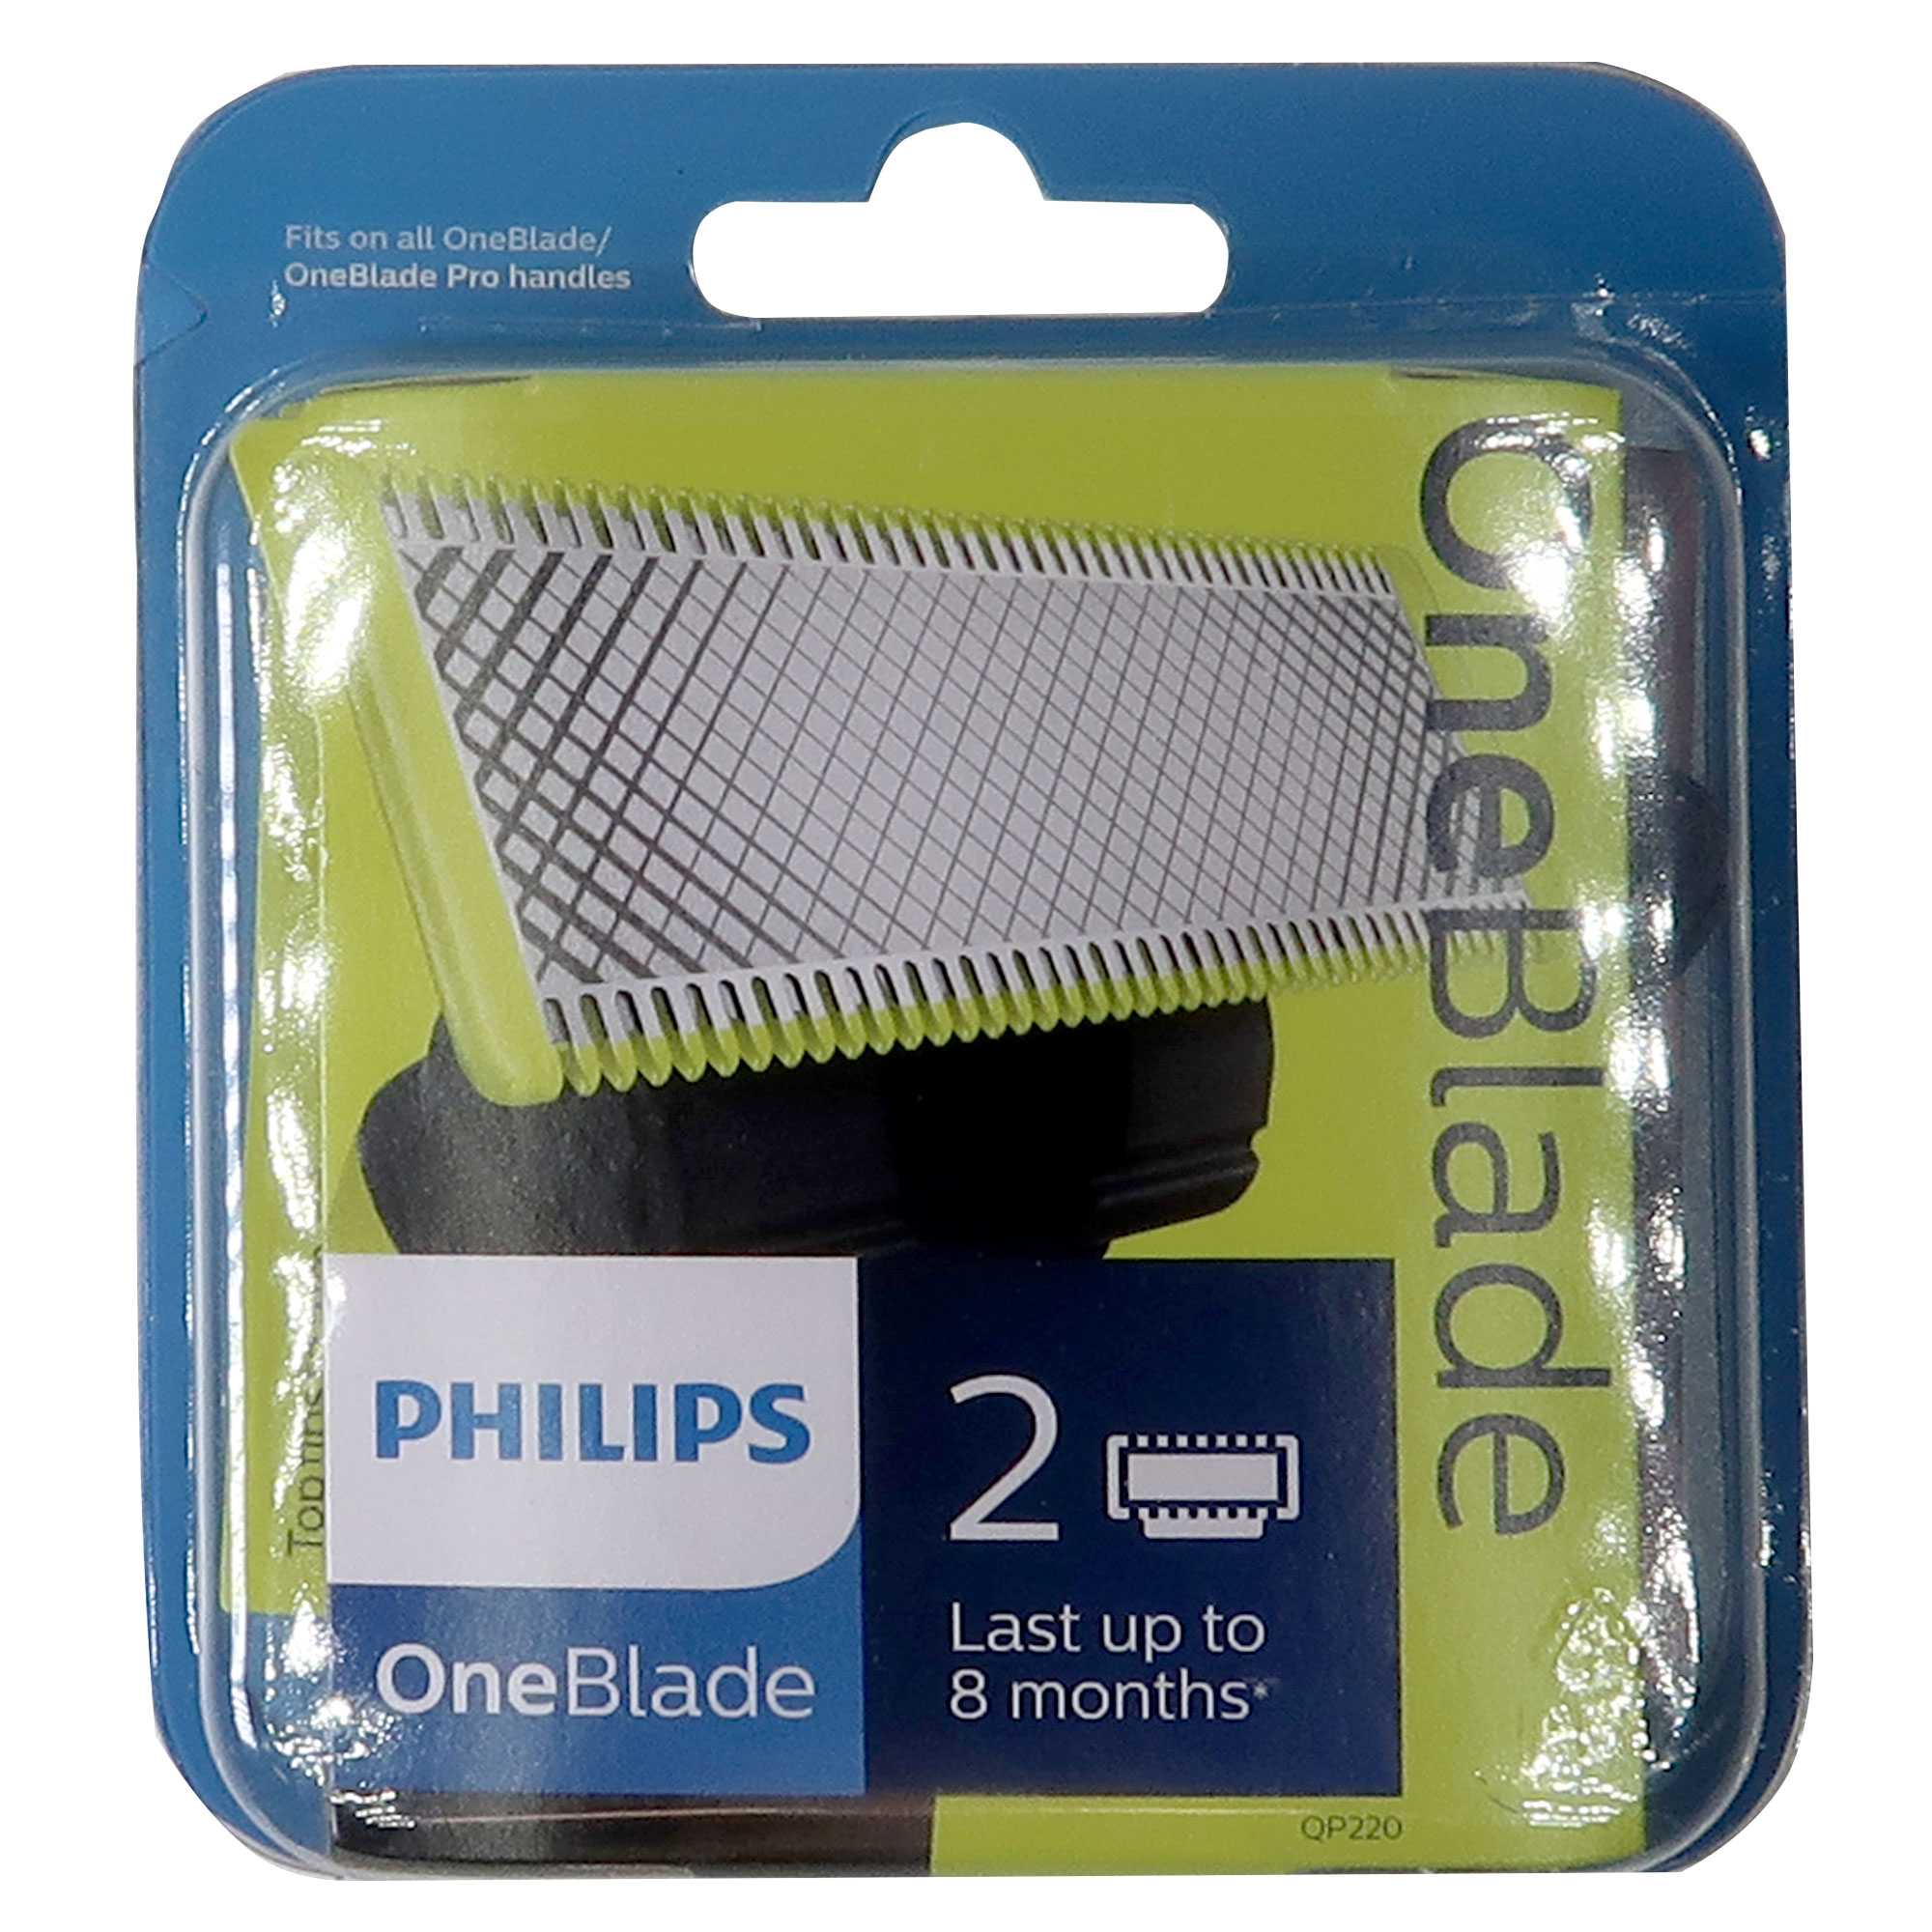 Philips OneBlade Replacement Blade Wet & Dry fits All OneBade and OneBlade Pro Handles - 2 Pack